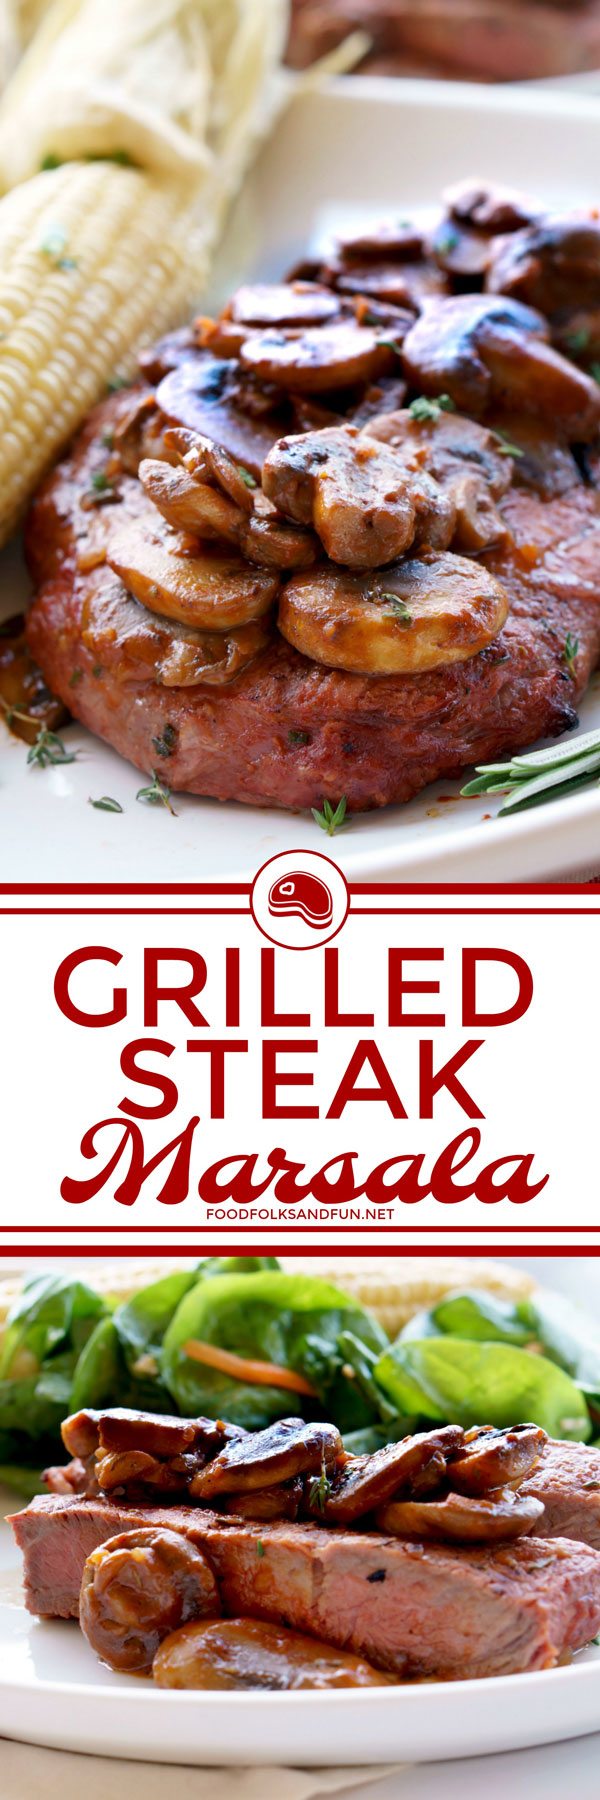 Grilled Steak Marsala recipe for easy weeknight dinners or entertaining